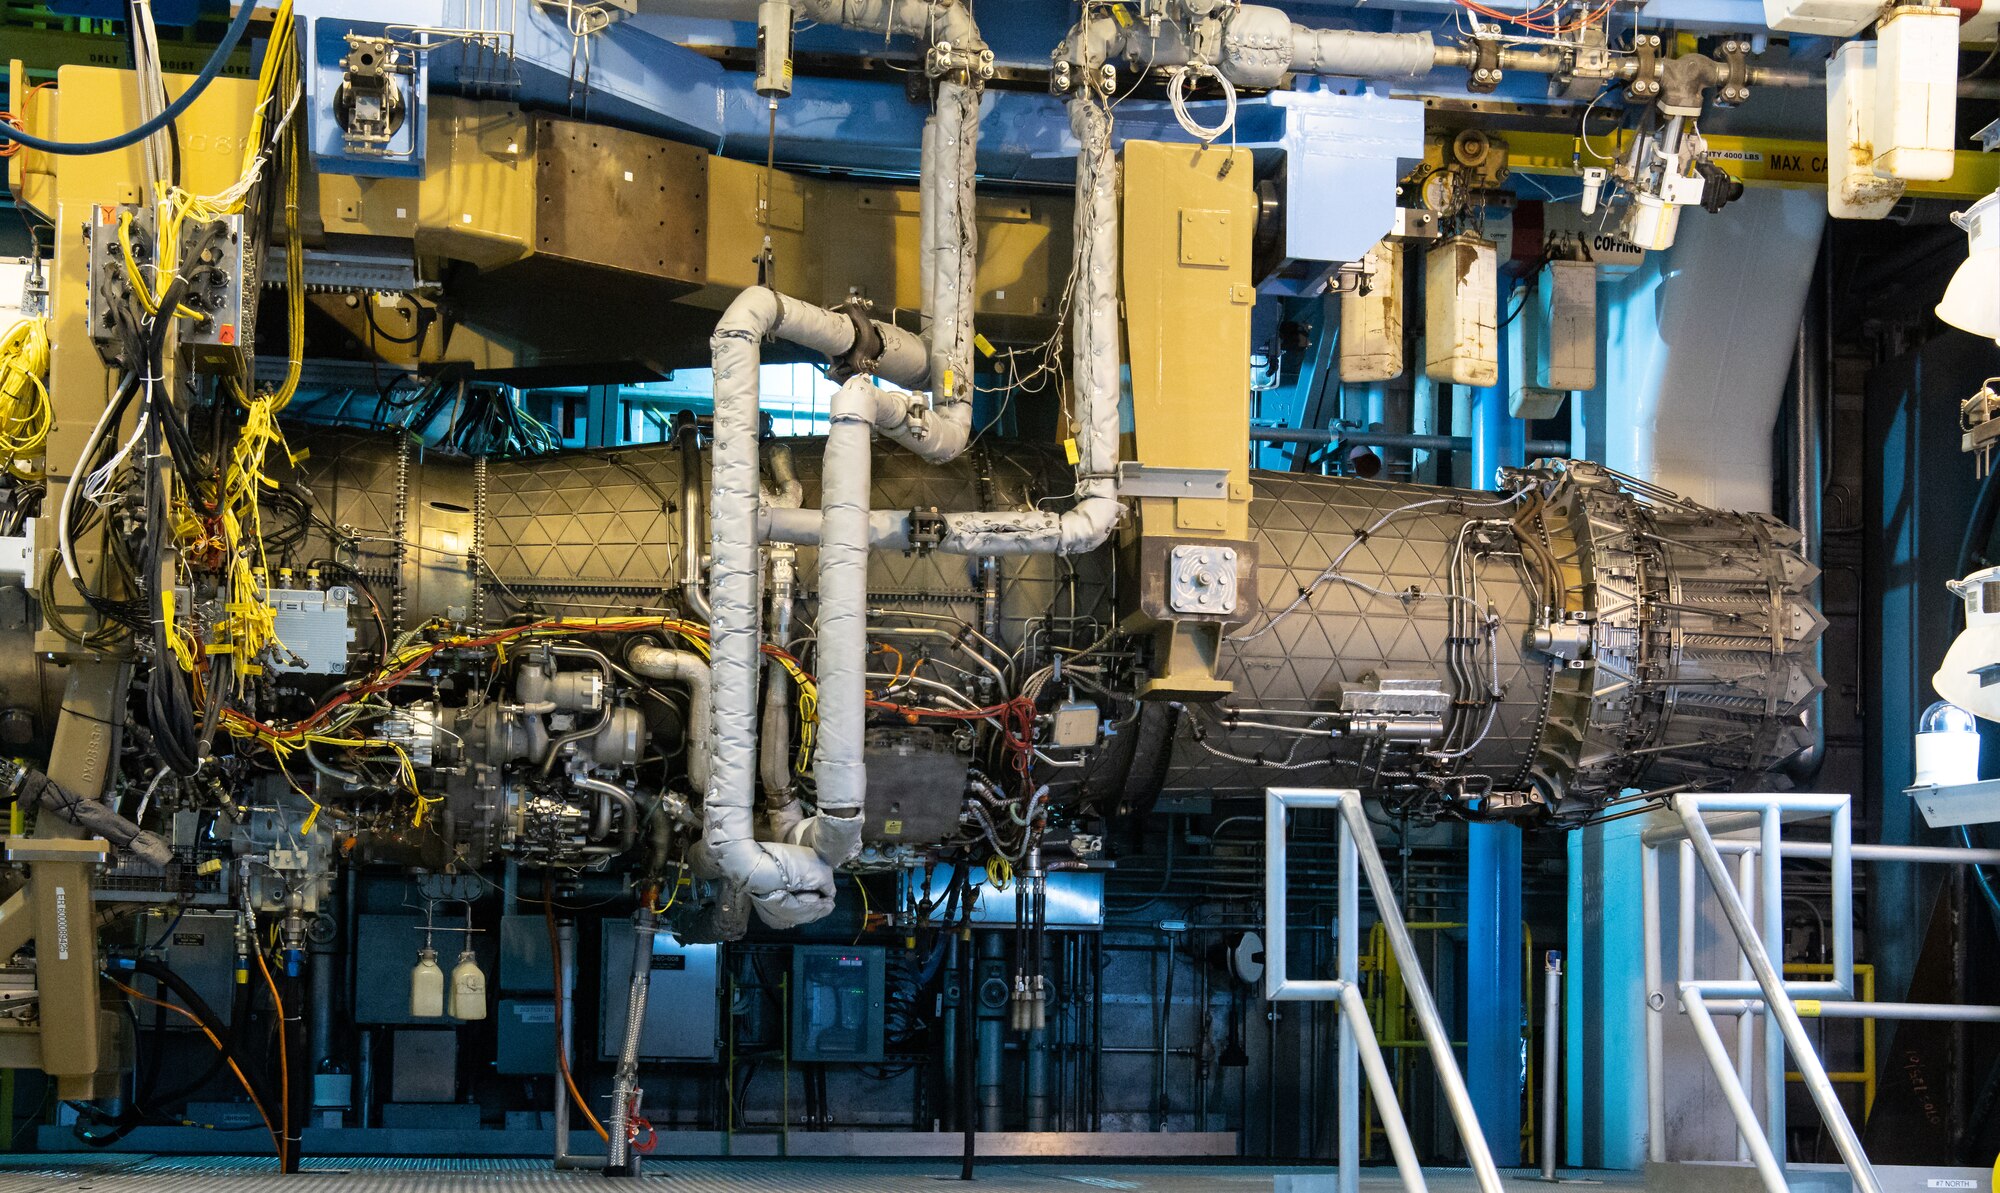 A Pratt & Whitney F135 engine hangs in Arnold Engineering Development Complex (AEDC) Sea Level Test Cell 3 at Arnold Air Force Base, Tenn., between test runs Sept. 2, 2021. (U.S. Air Force photo by Jill Pickett)